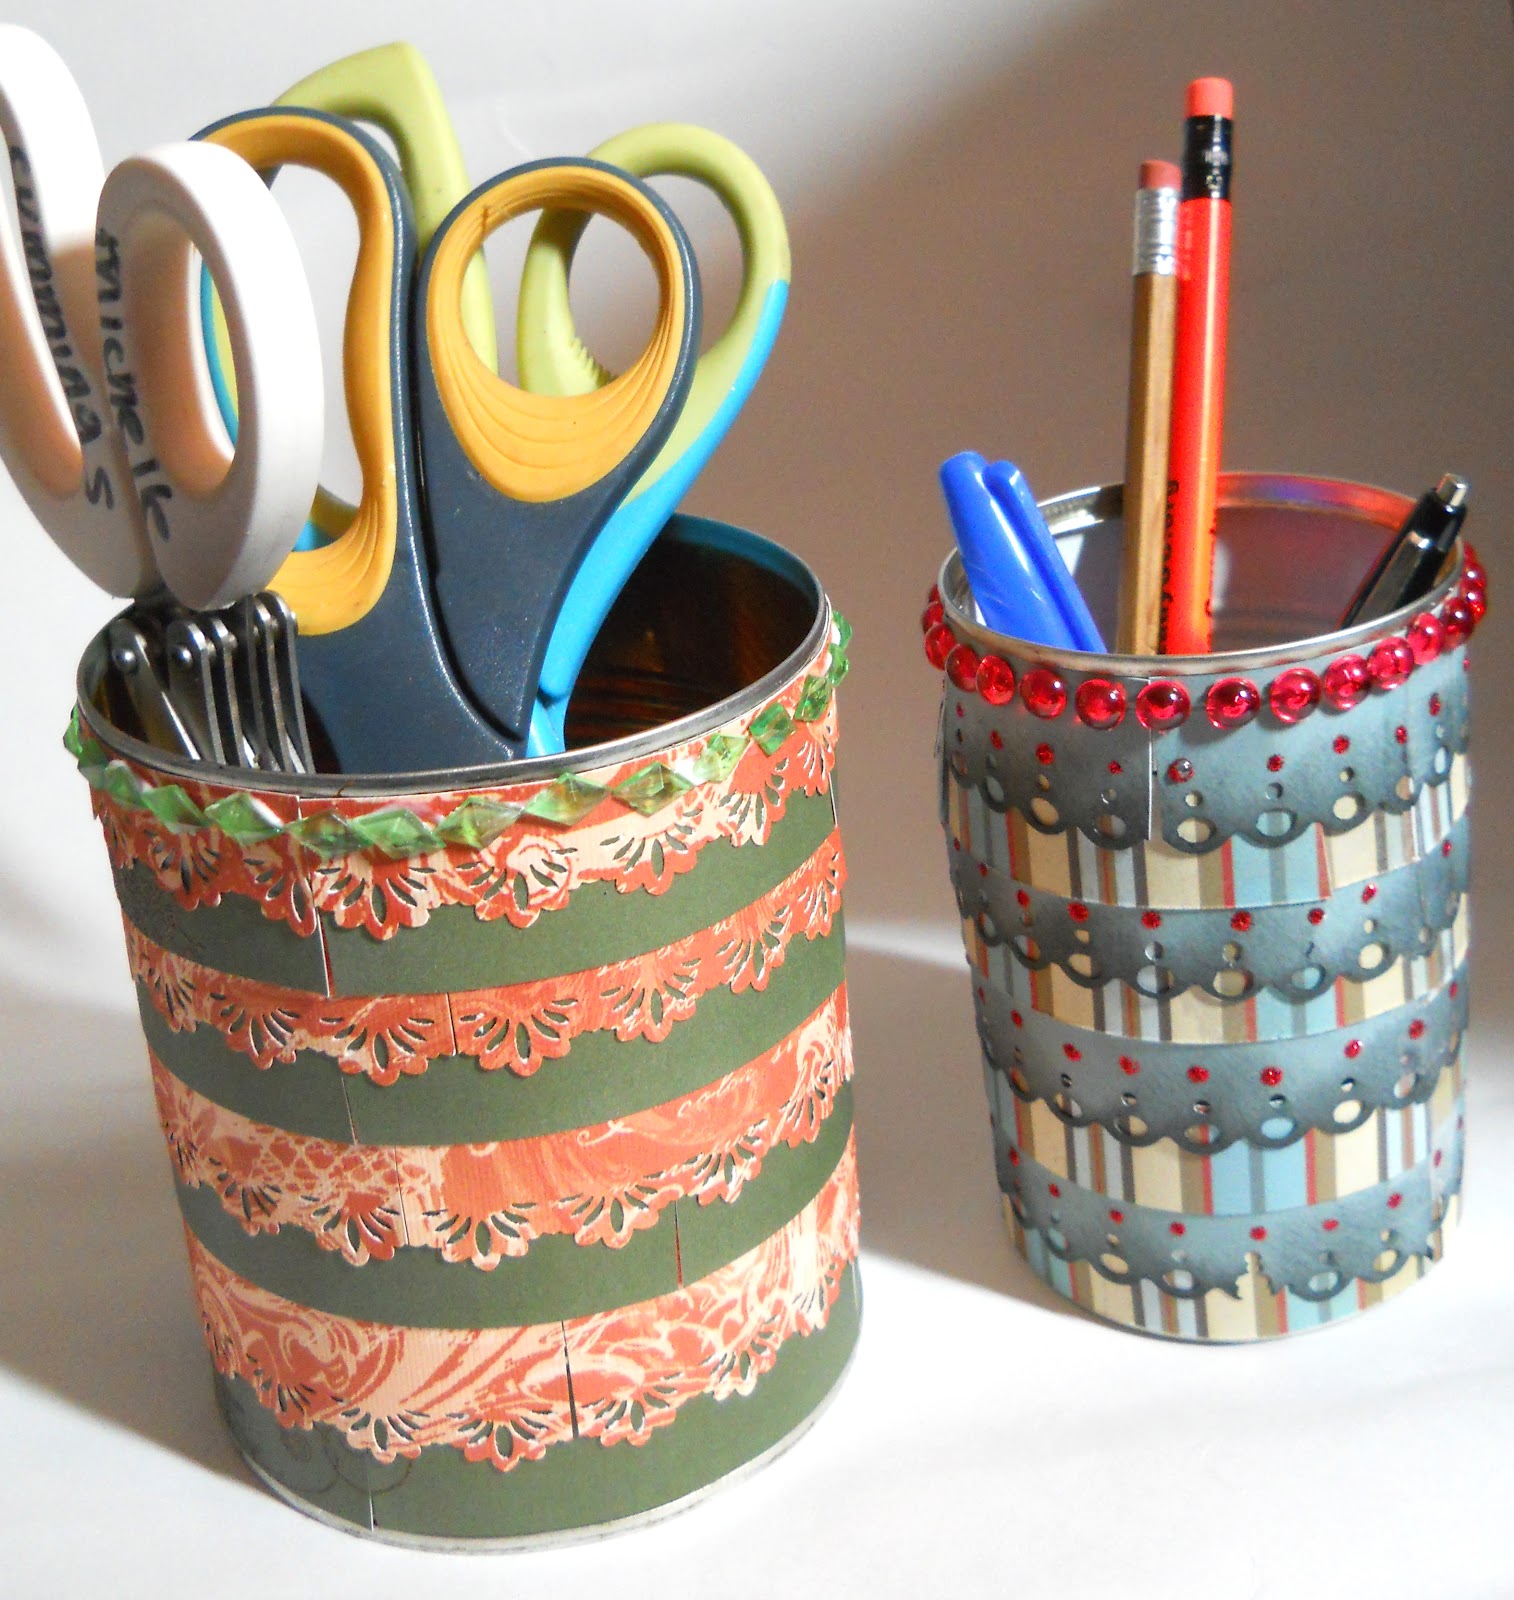 Chattering Robins: Decorated Pencil Tins!